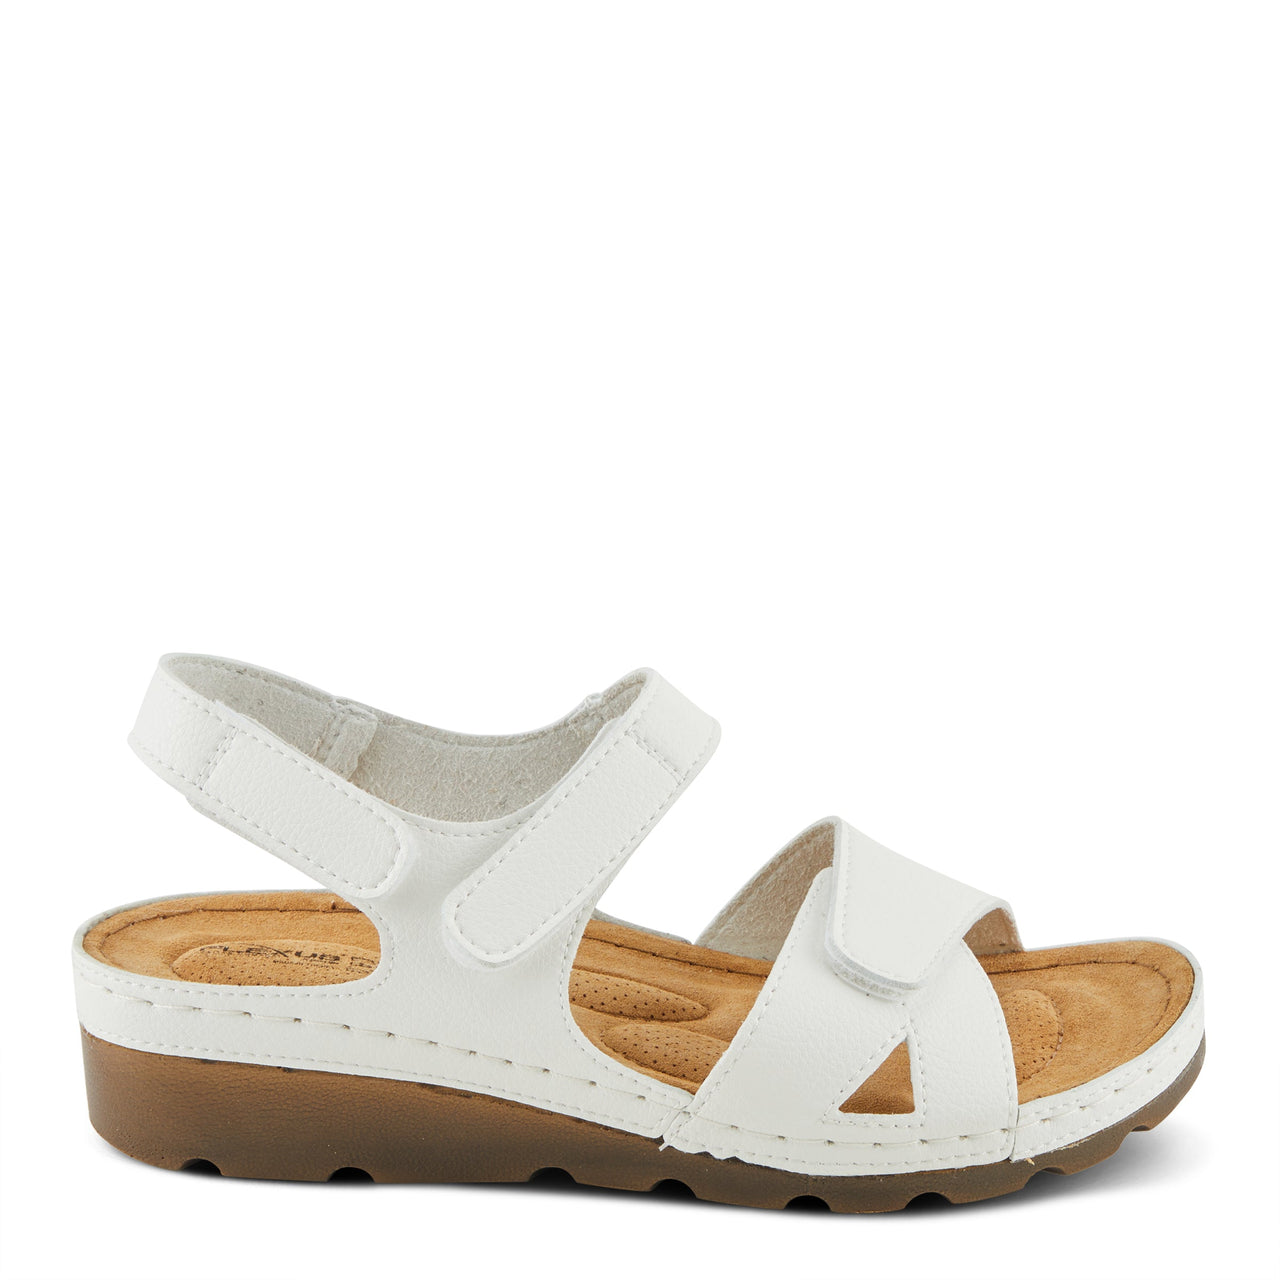 Spring Step Shoes Flexus Ariel Sandals in Pewter leather with lightweight construction